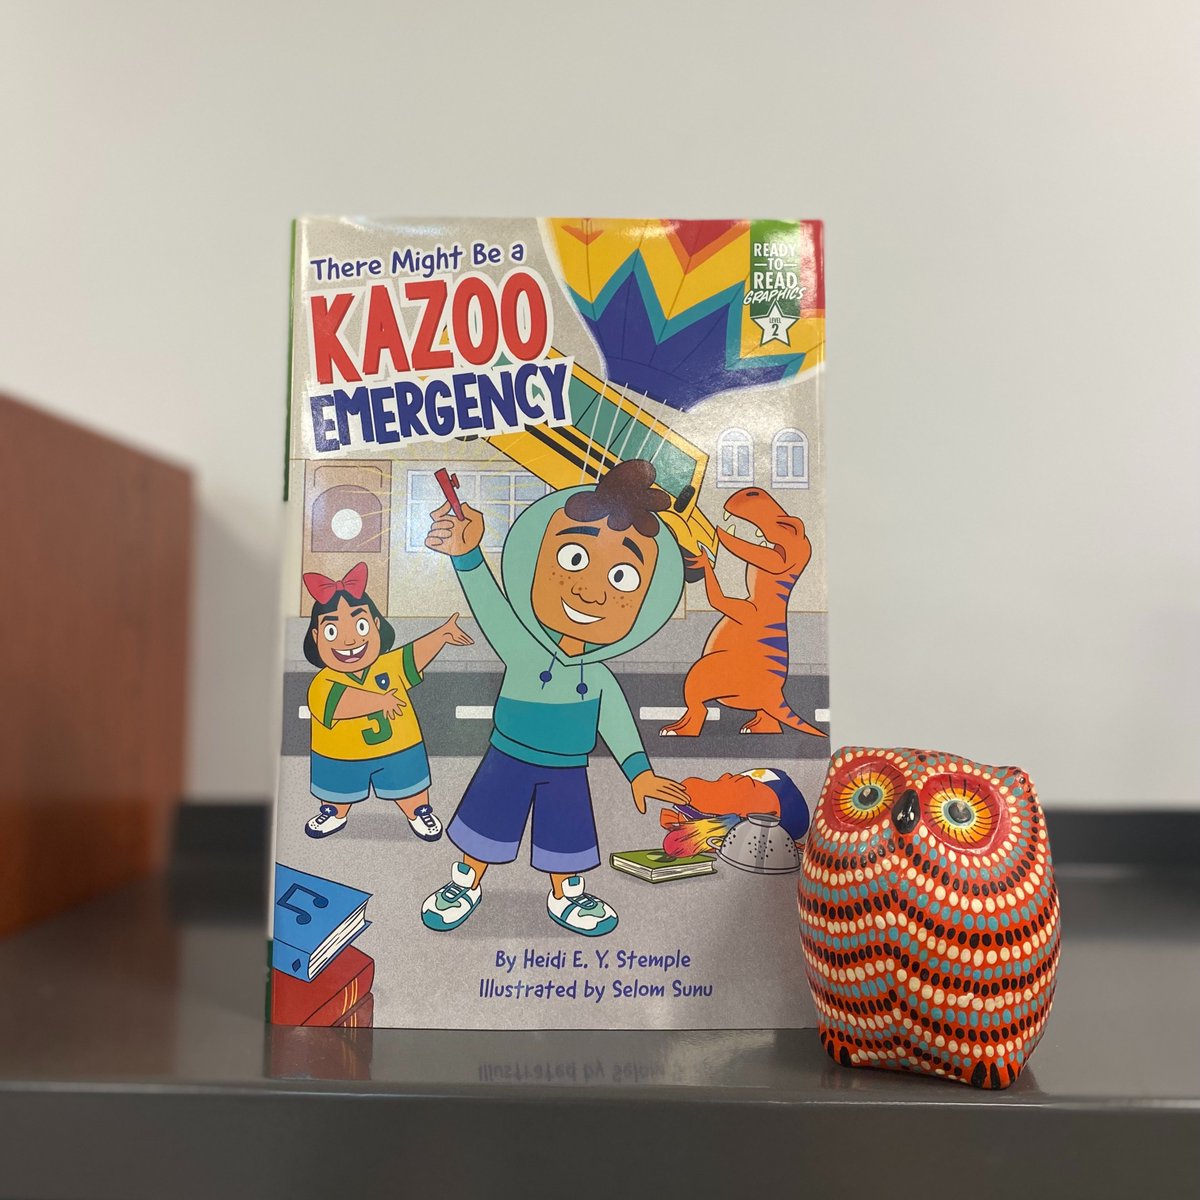 📚 There Might Be a Kazoo Emergency by Heidi E. Y. Stemple and Selom Sunu. #dailybutlershelfie #ThereMightBeAKazooEmergency @heidieys @SelomSunu @simonschuster